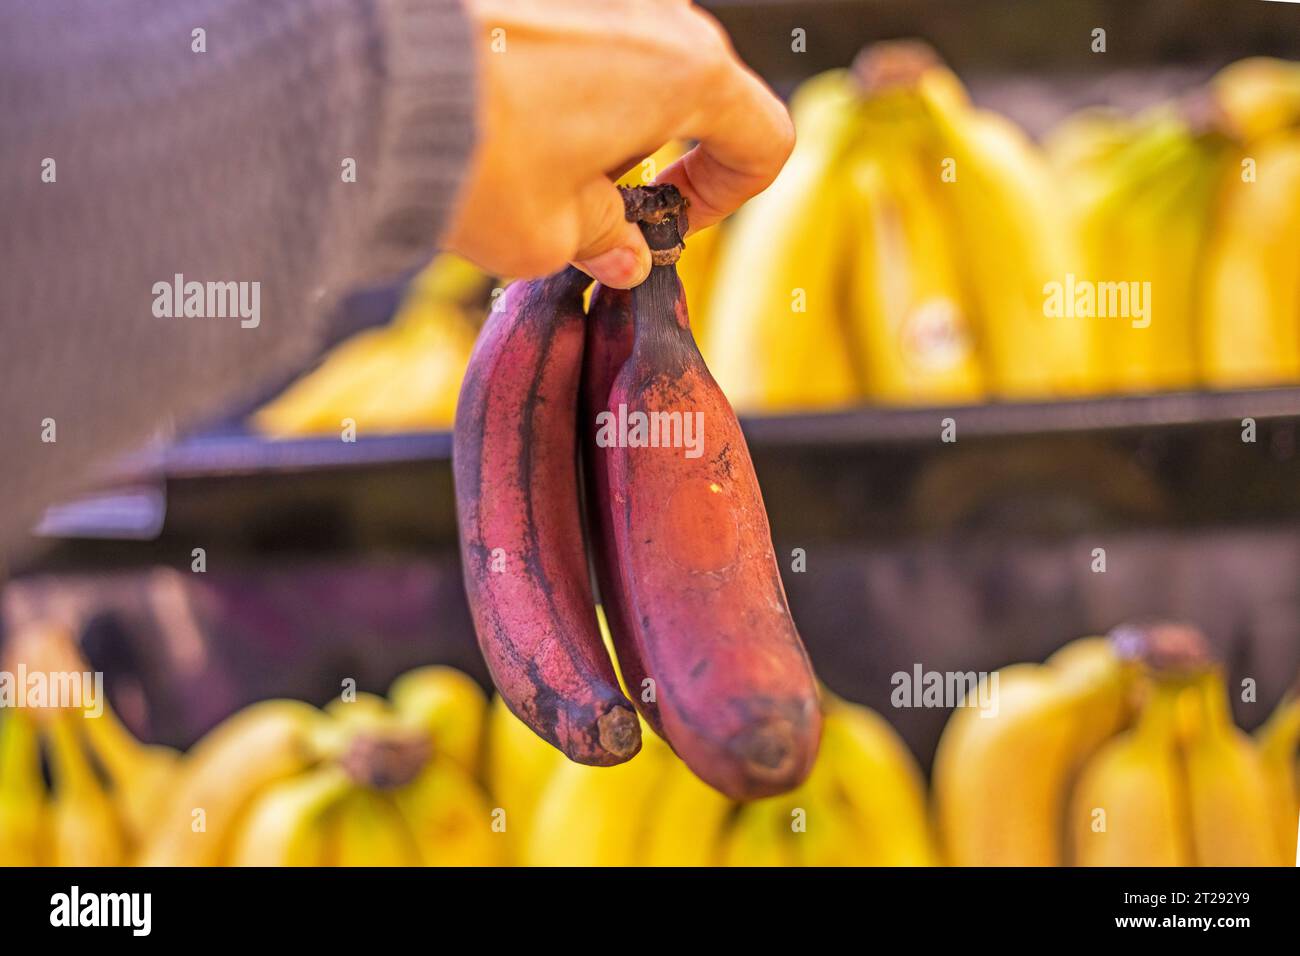 holding in hand a bunch of small brown bananas in a supermarket store Stock Photo